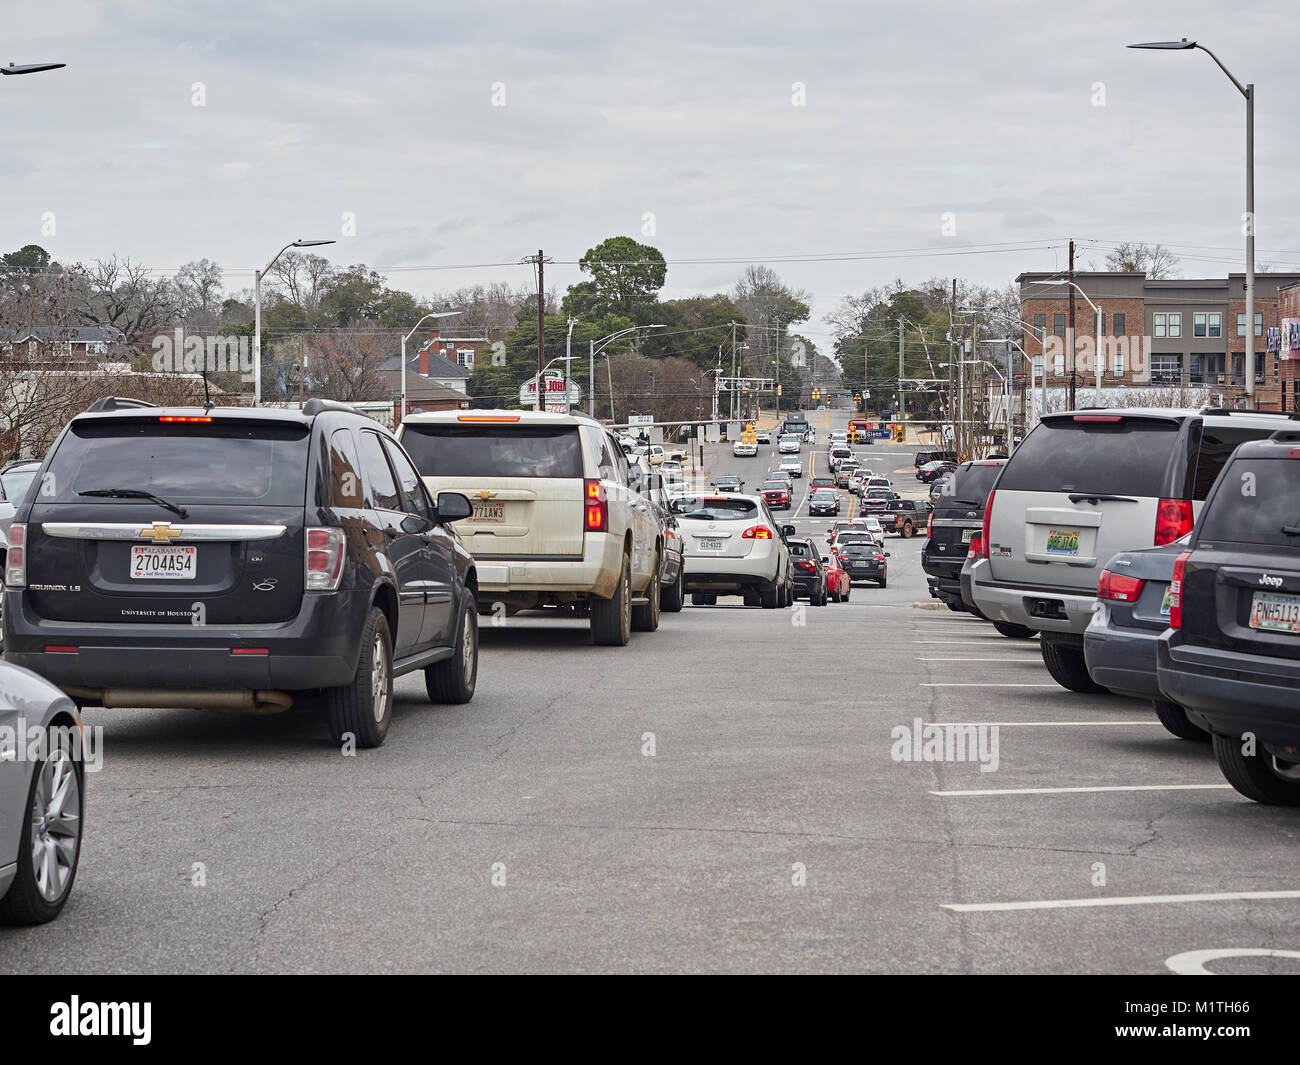 Vehicle traffic on College Street backed up in gridlock in the small town of Auburn Alabama, United States. Stock Photo